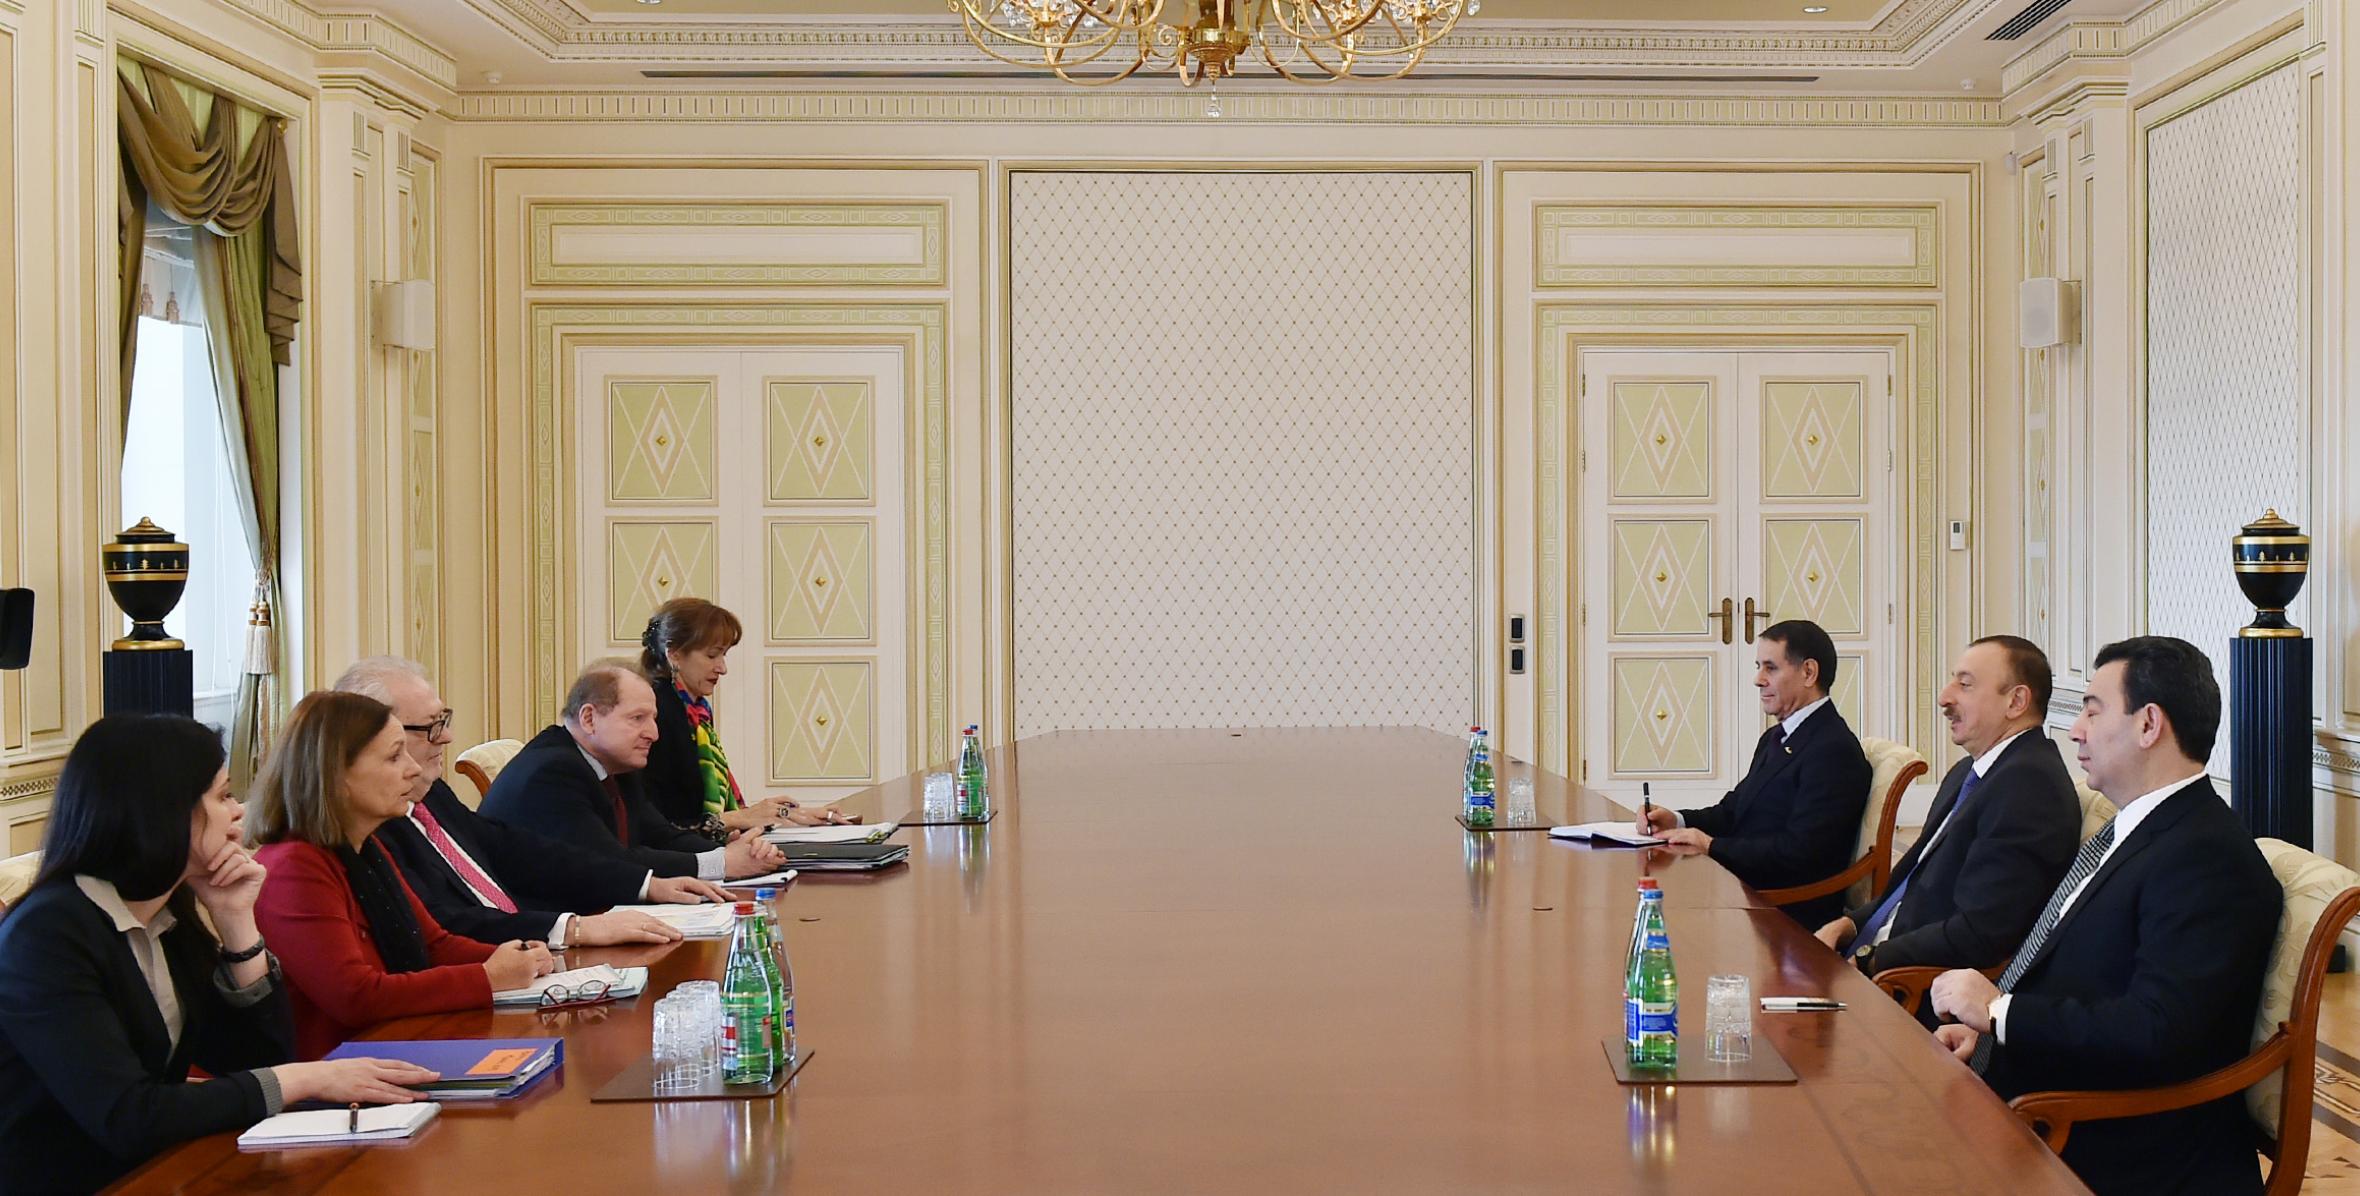 Ilham Aliyev received a delegation led by the co-rapporteur of the PACE Monitoring Committee